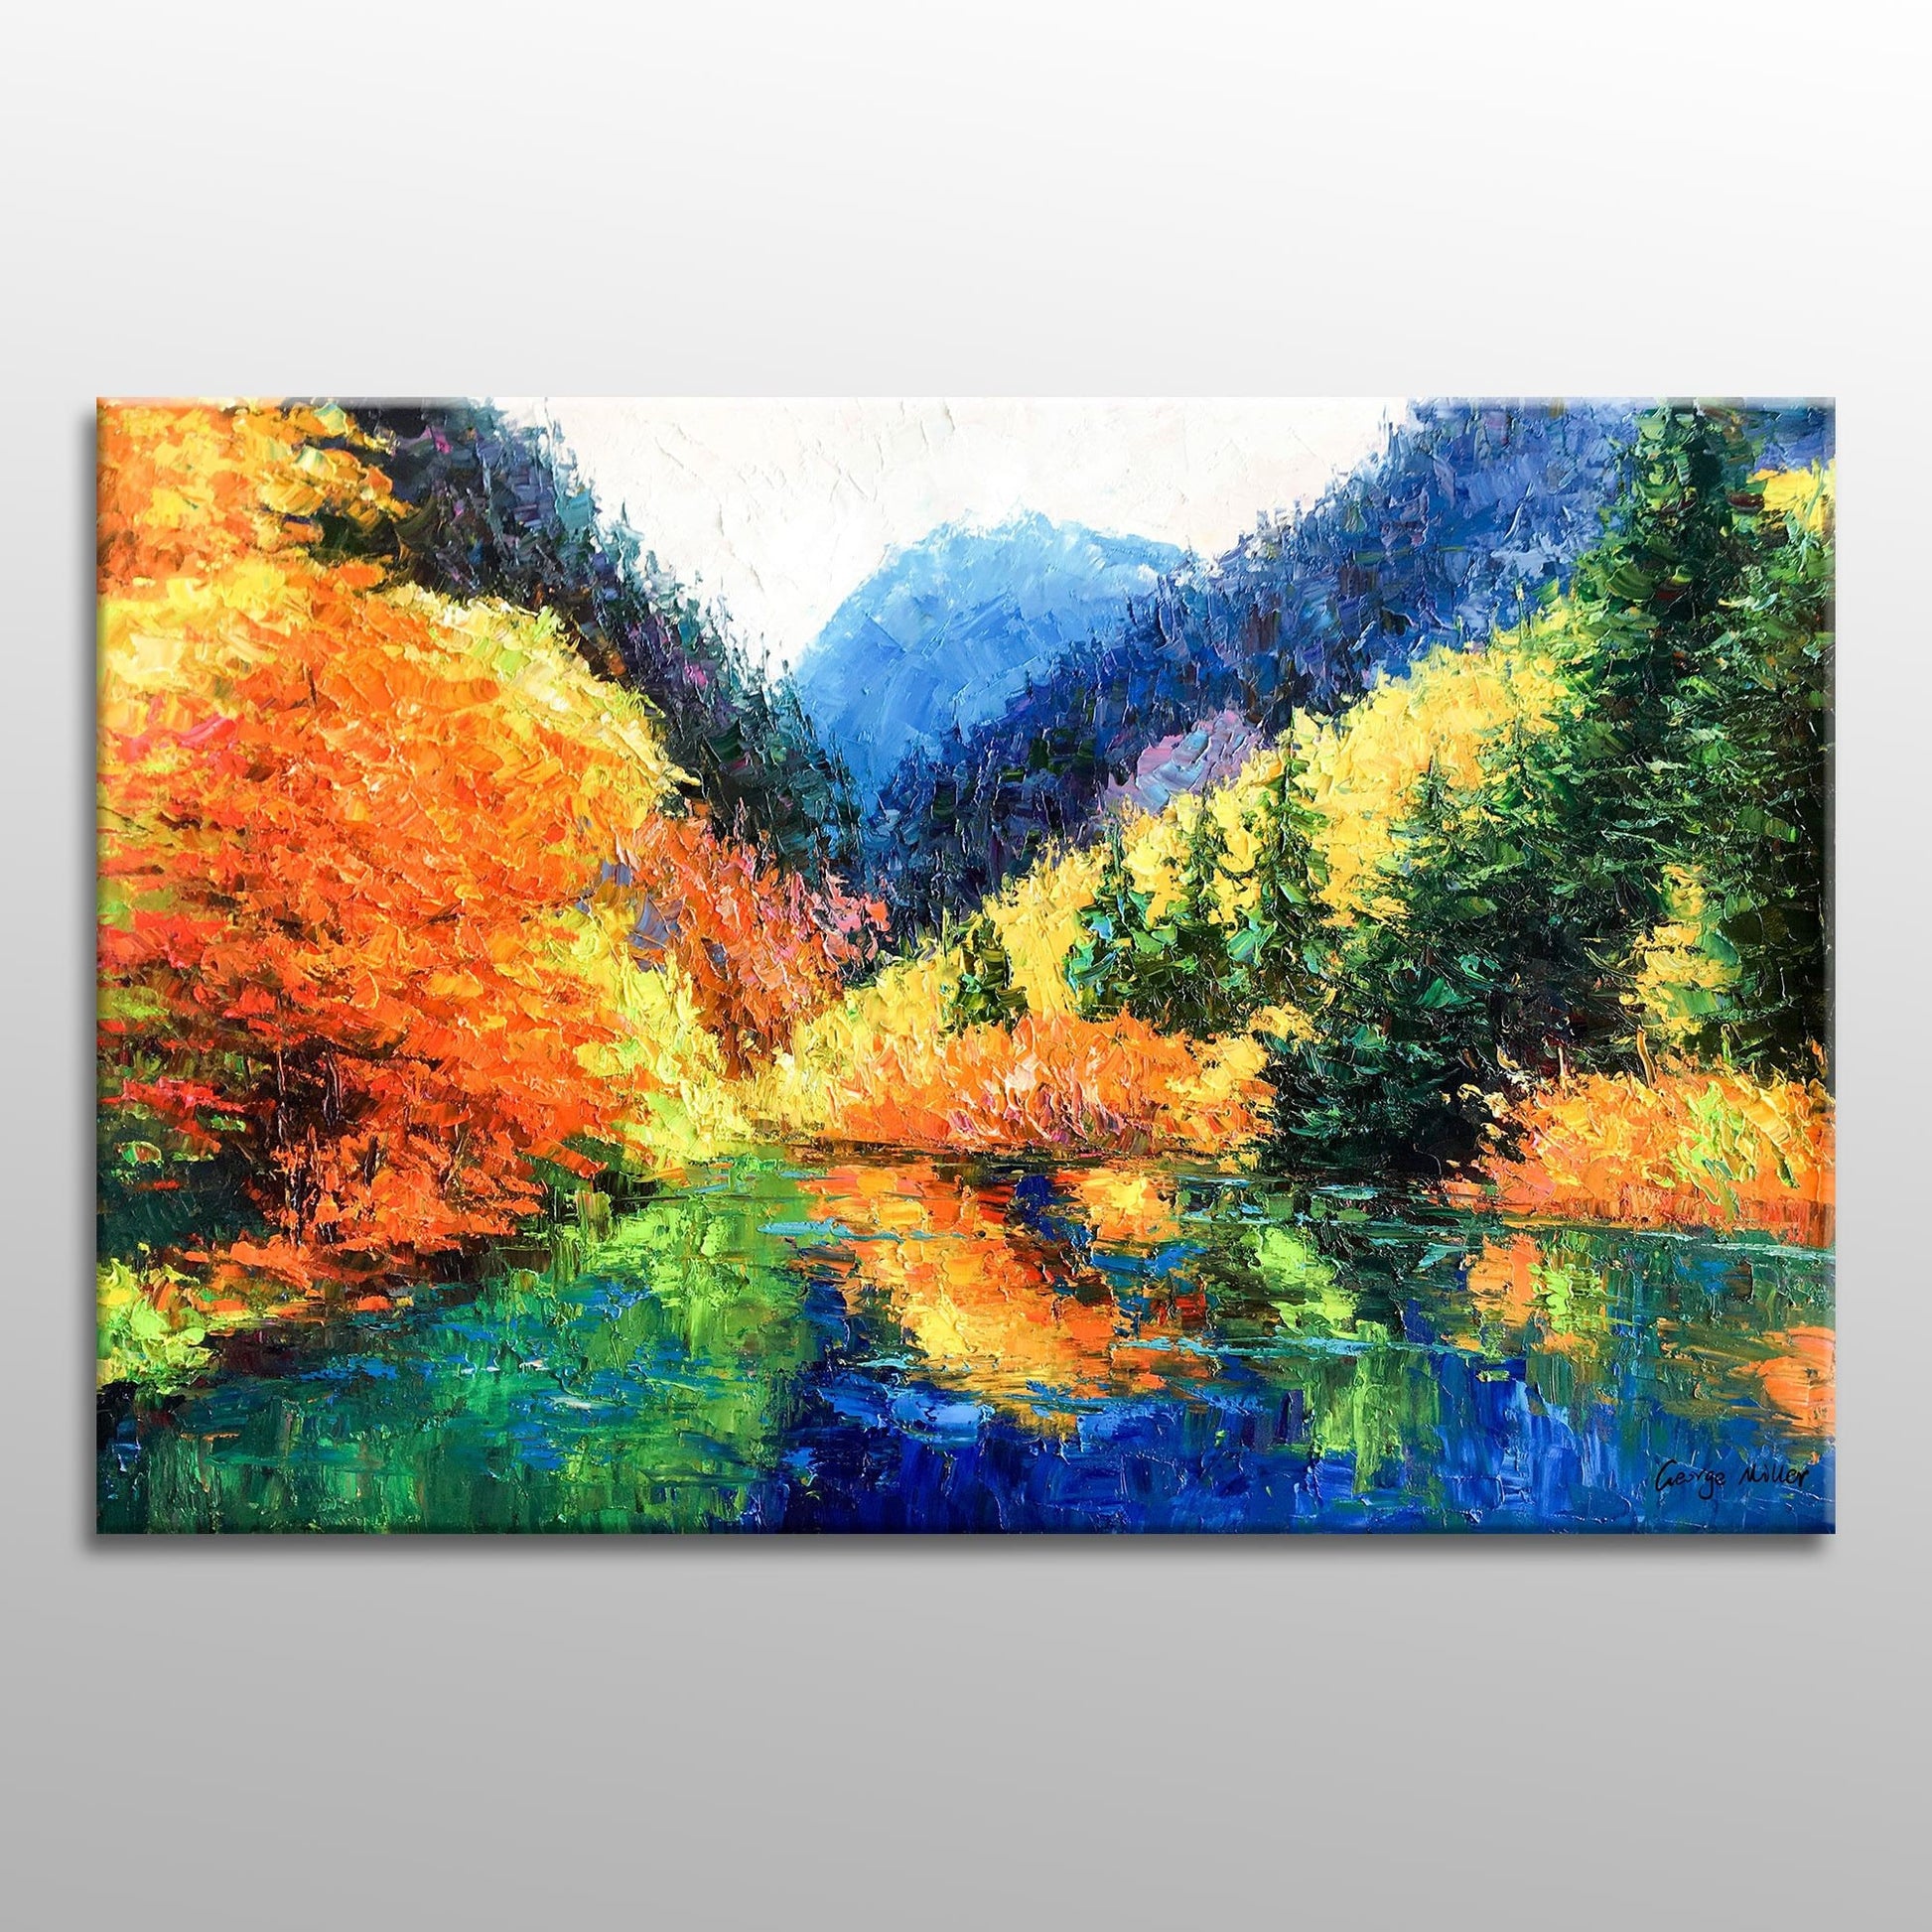 Large Landscape Painting Autumn Mountains, Contemporary Painting, Original Abstract Painting, Wall Decor, Abstract Canvas Painting, Wall Art